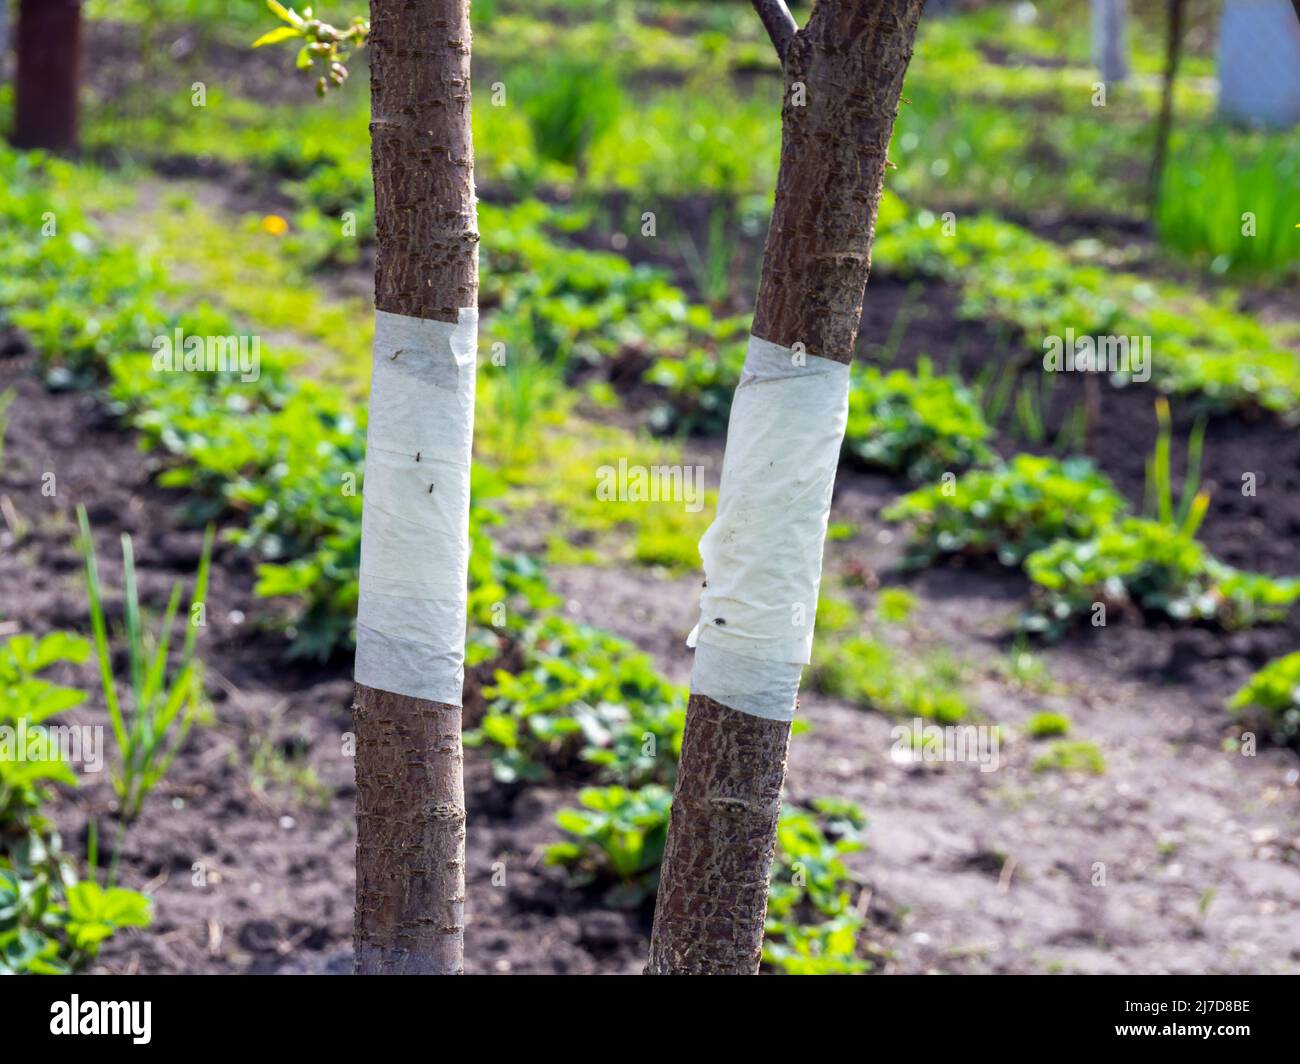 Masking tape on a tree trunk as a trapping belt Stock Photo - Alamy